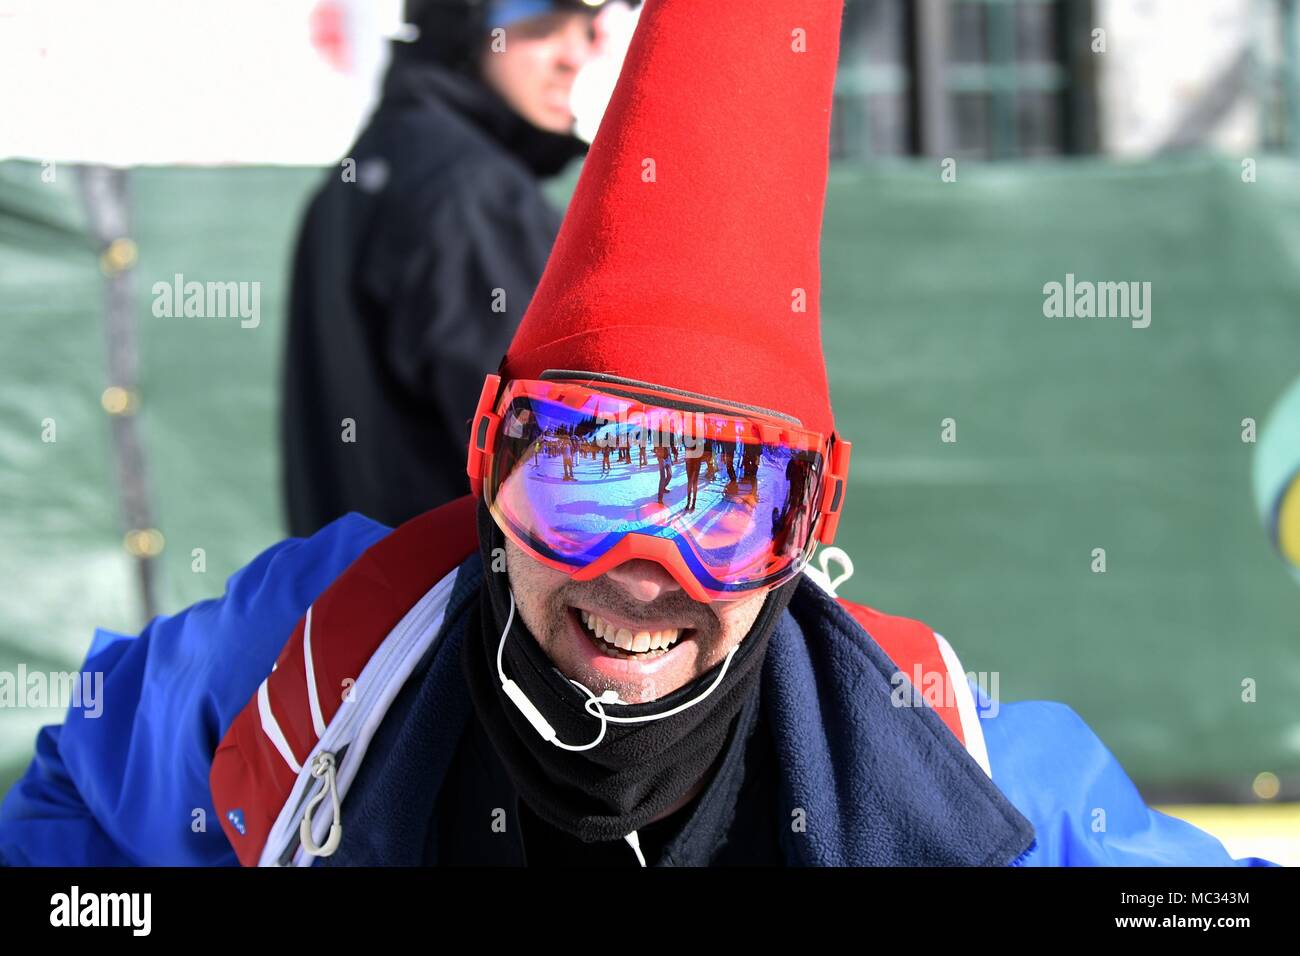 A SnoFest participant shows off his gear at the annual SnoFest at Copper Mountain, Colorado, Jan. 20, 2018. Skiers wore various accessories to help them stand out on the slopes. (U.S. Air Force photo by Airman 1st Class William Tracy) Stock Photo